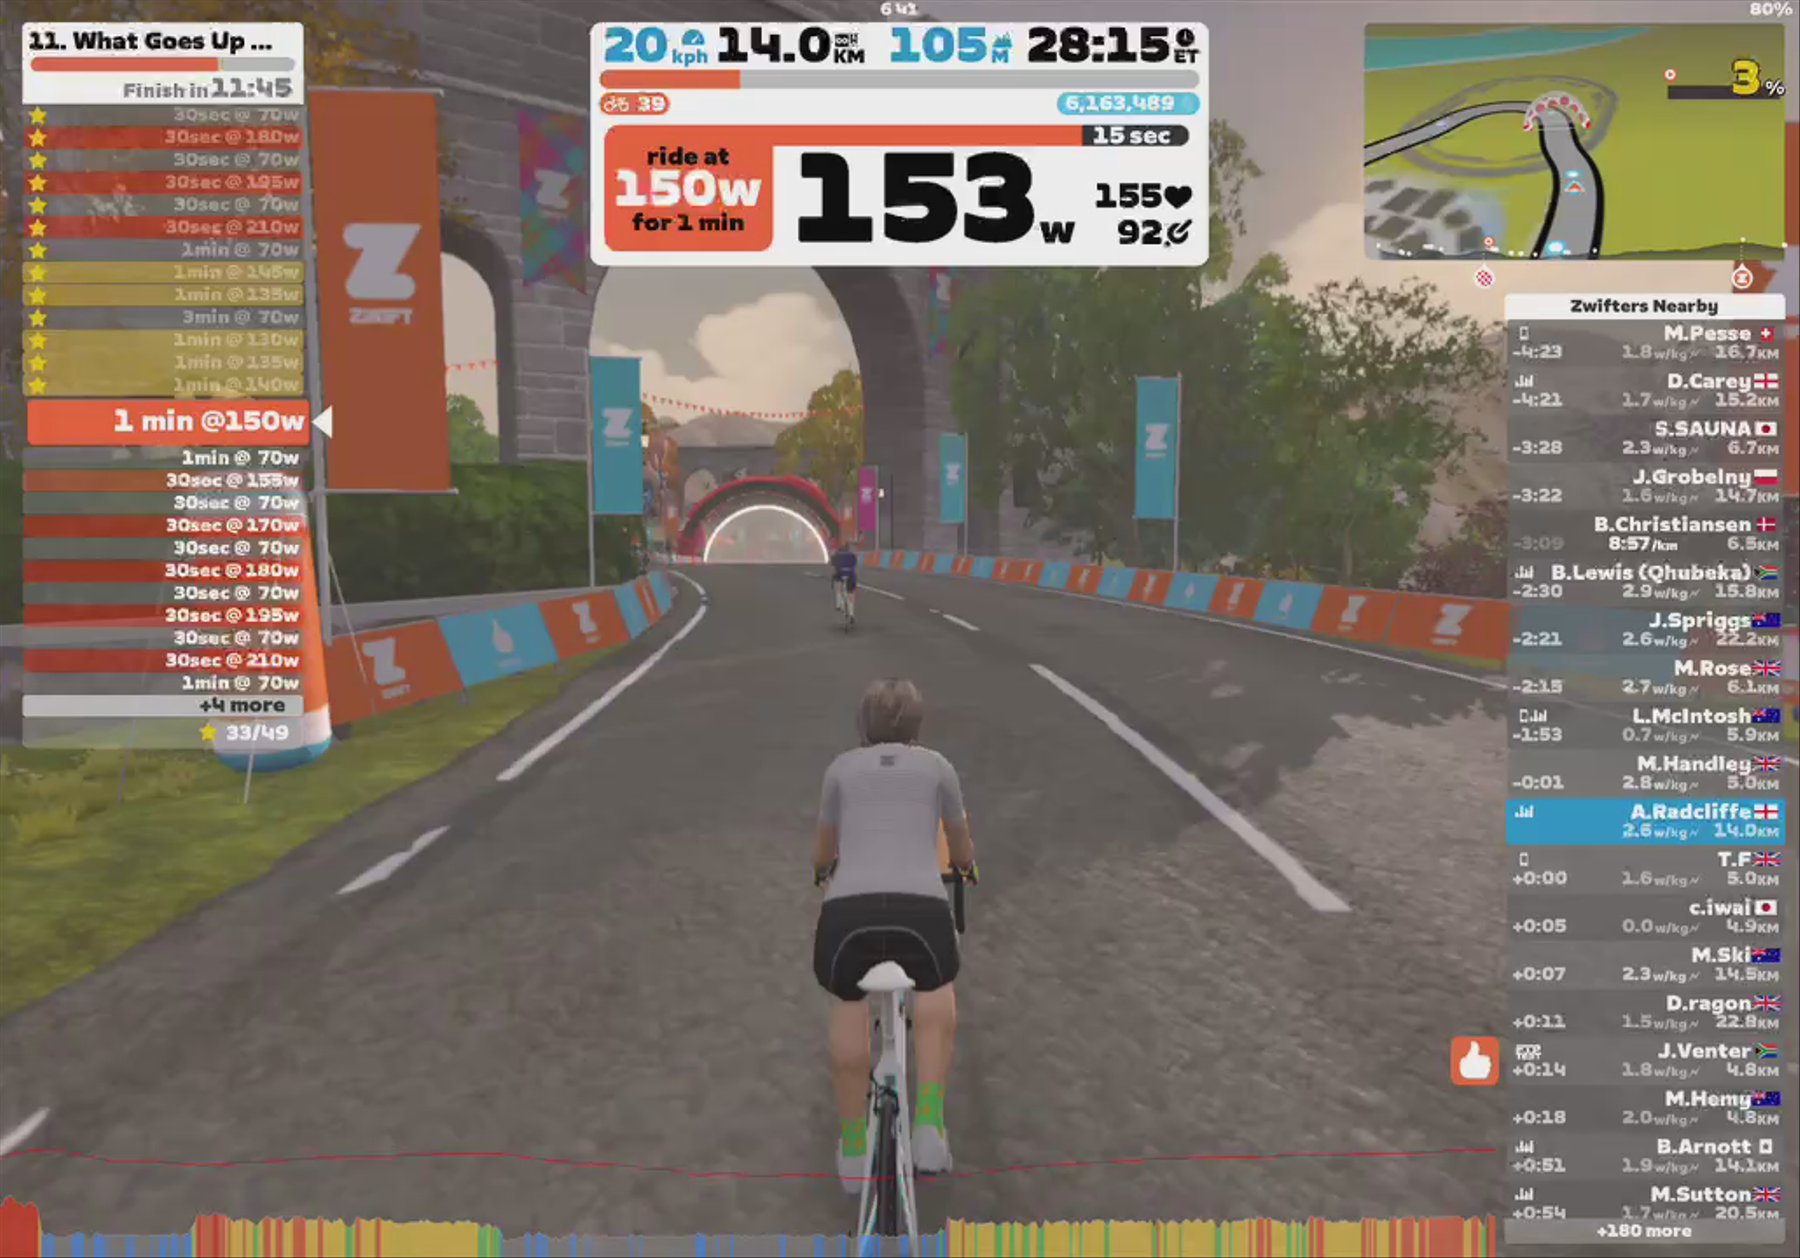 Zwift - 11. What Goes Up Must Come Down in Scotland